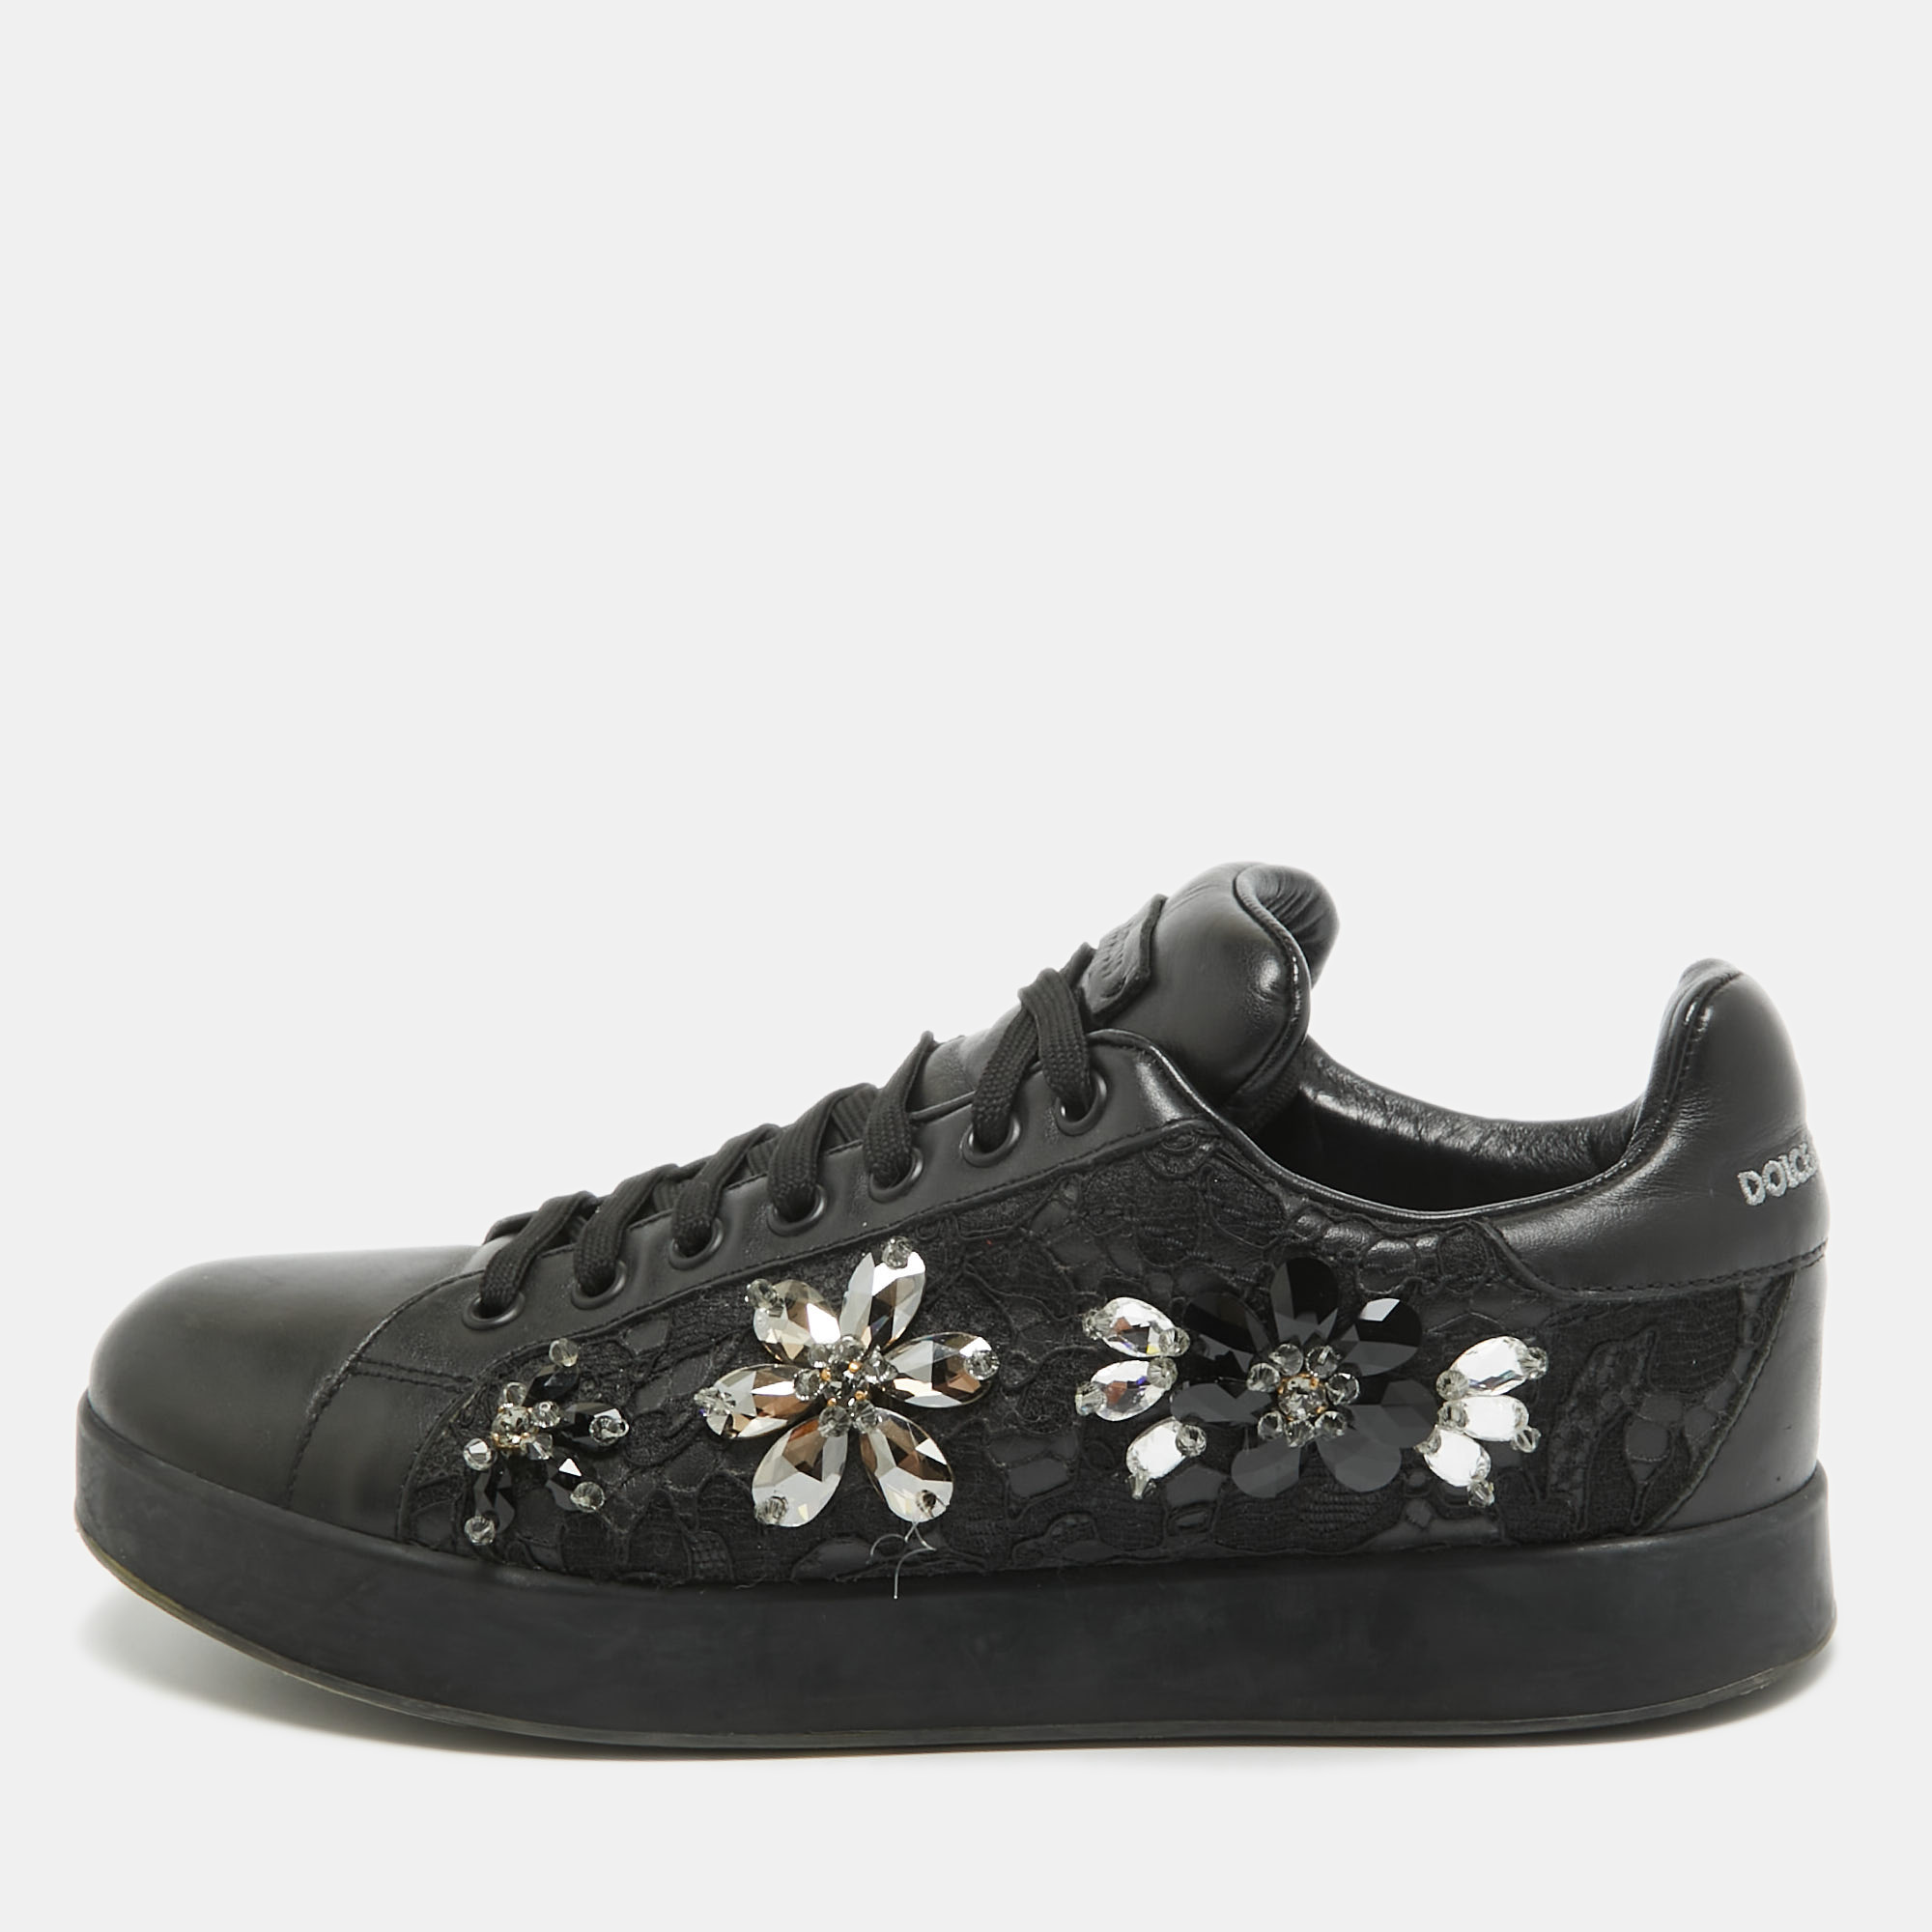 Dolce & gabbana black leather crystal embellished low top sneakers size 39